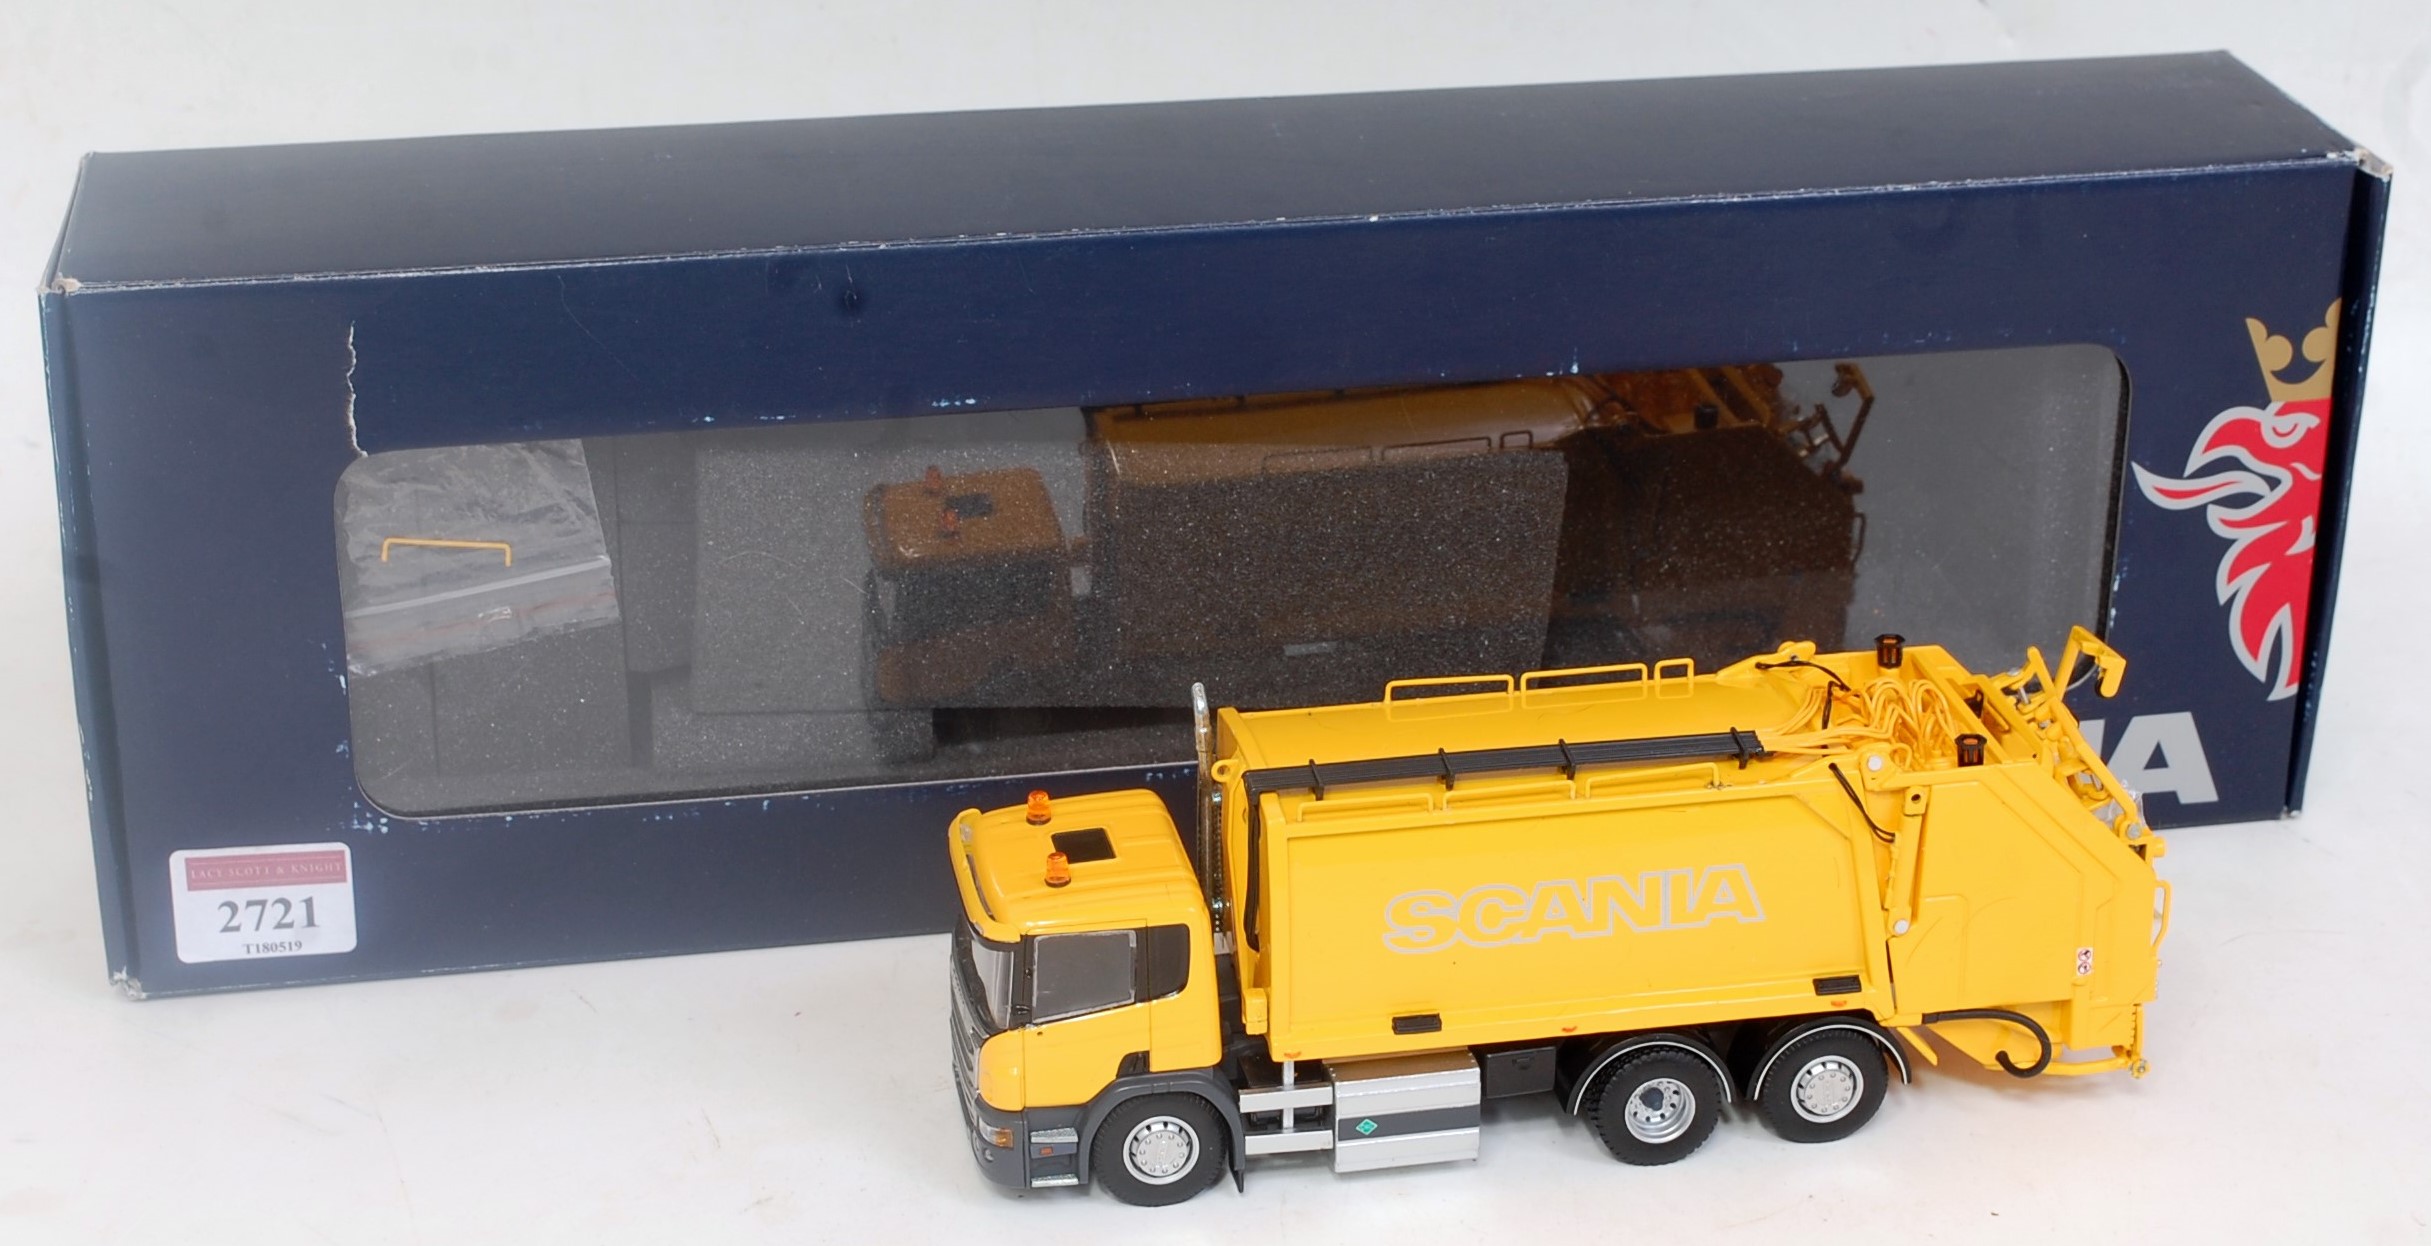 A Tekno 1:50 scale model of a Scania P340 6x2 refuse collector comprising yellow body with silver